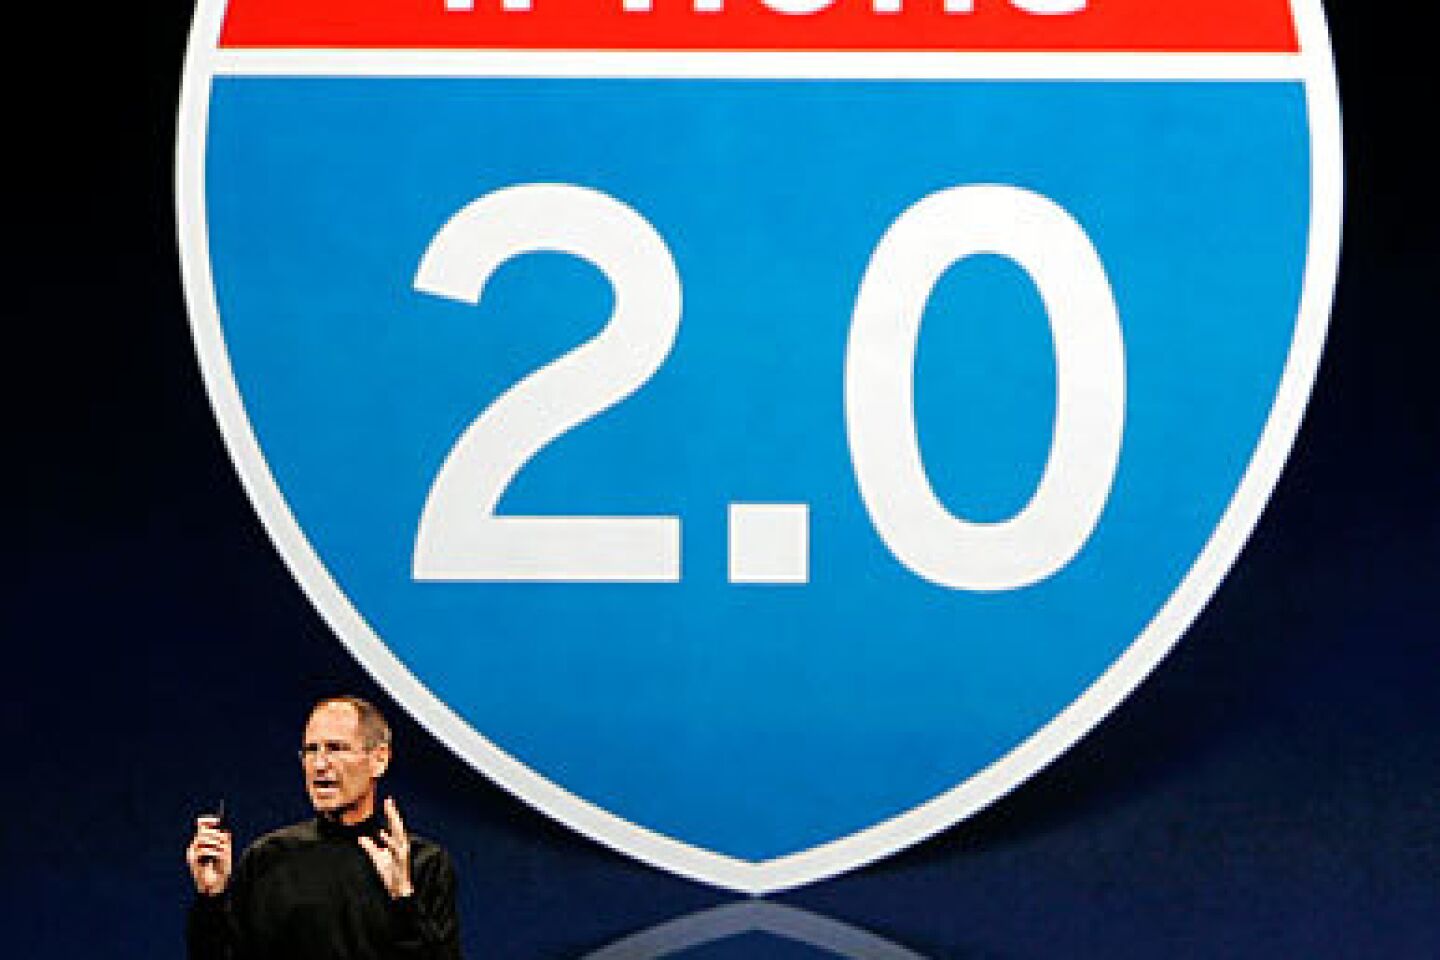 Jobs delivers the keynote speech during the Apple Worldwide Developers Conference in San Francisco.